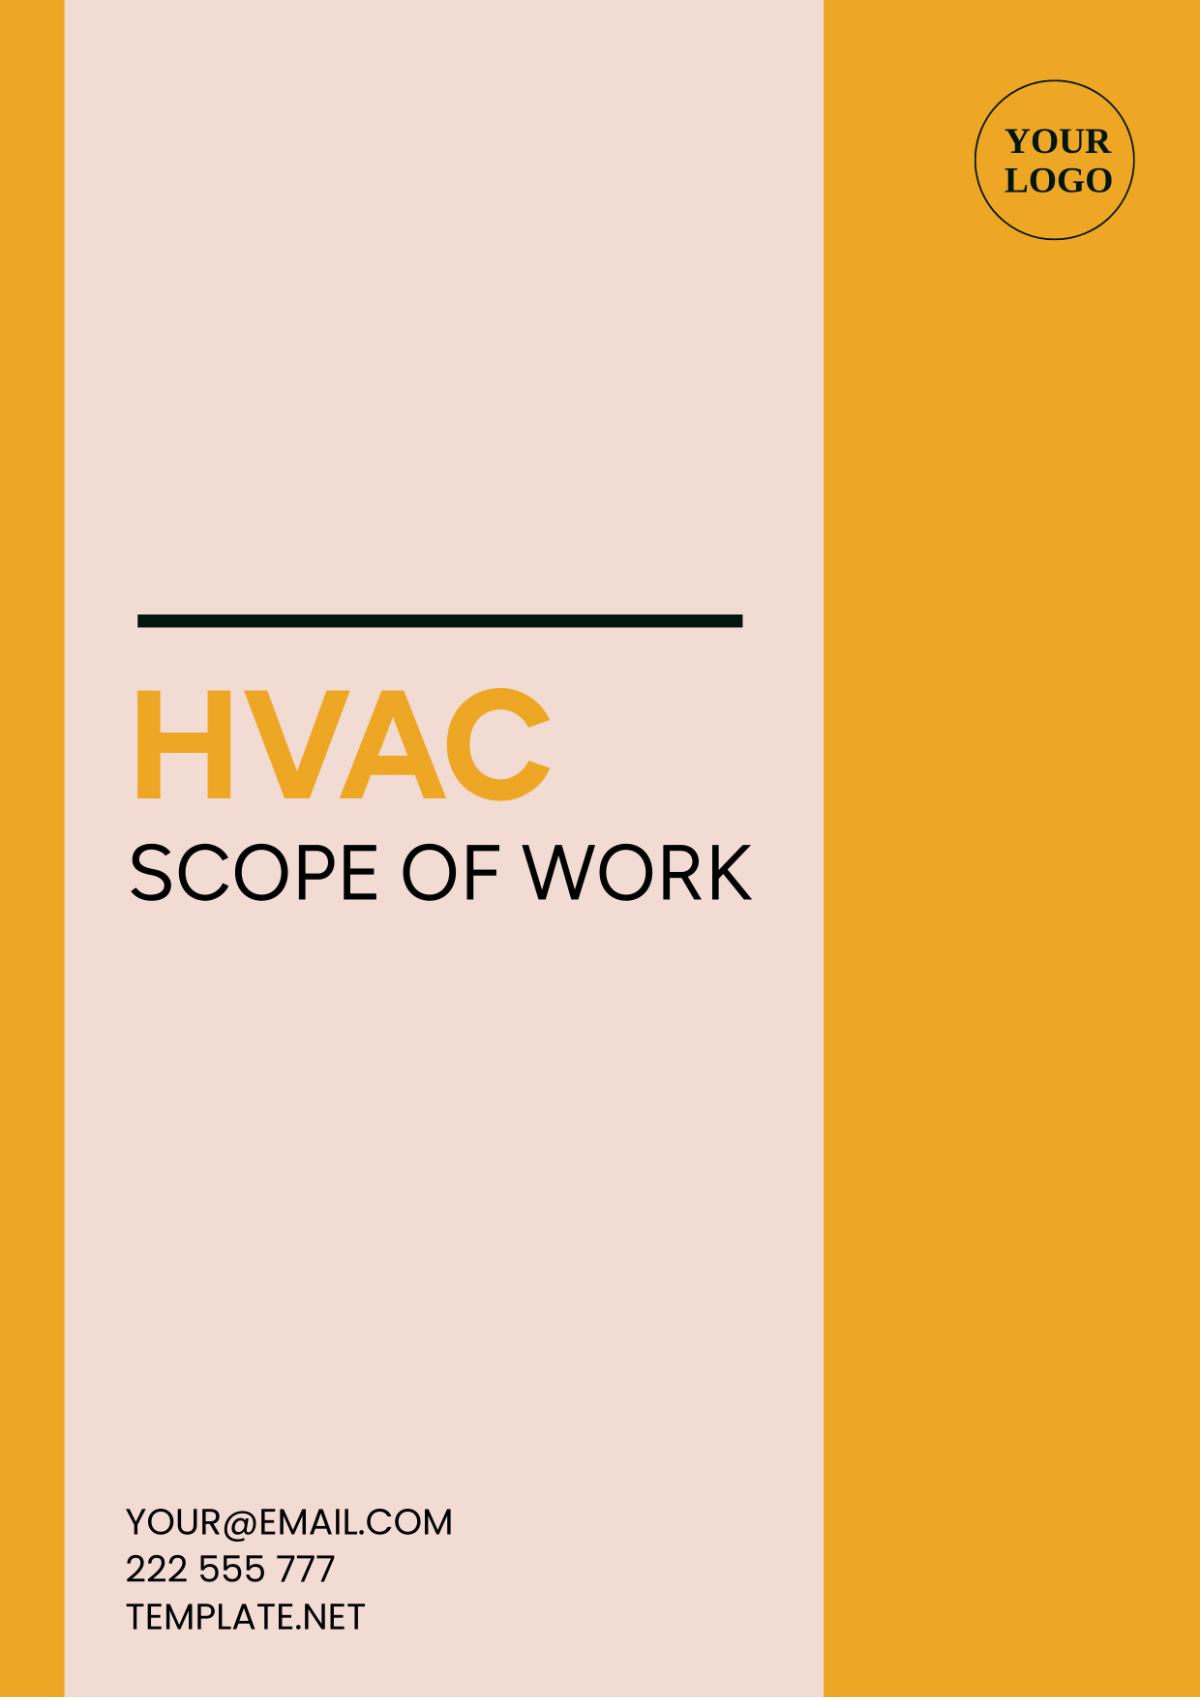 Free Hvac(Heat, Ventilation, Air, Conditioning) Scope Of Work Template